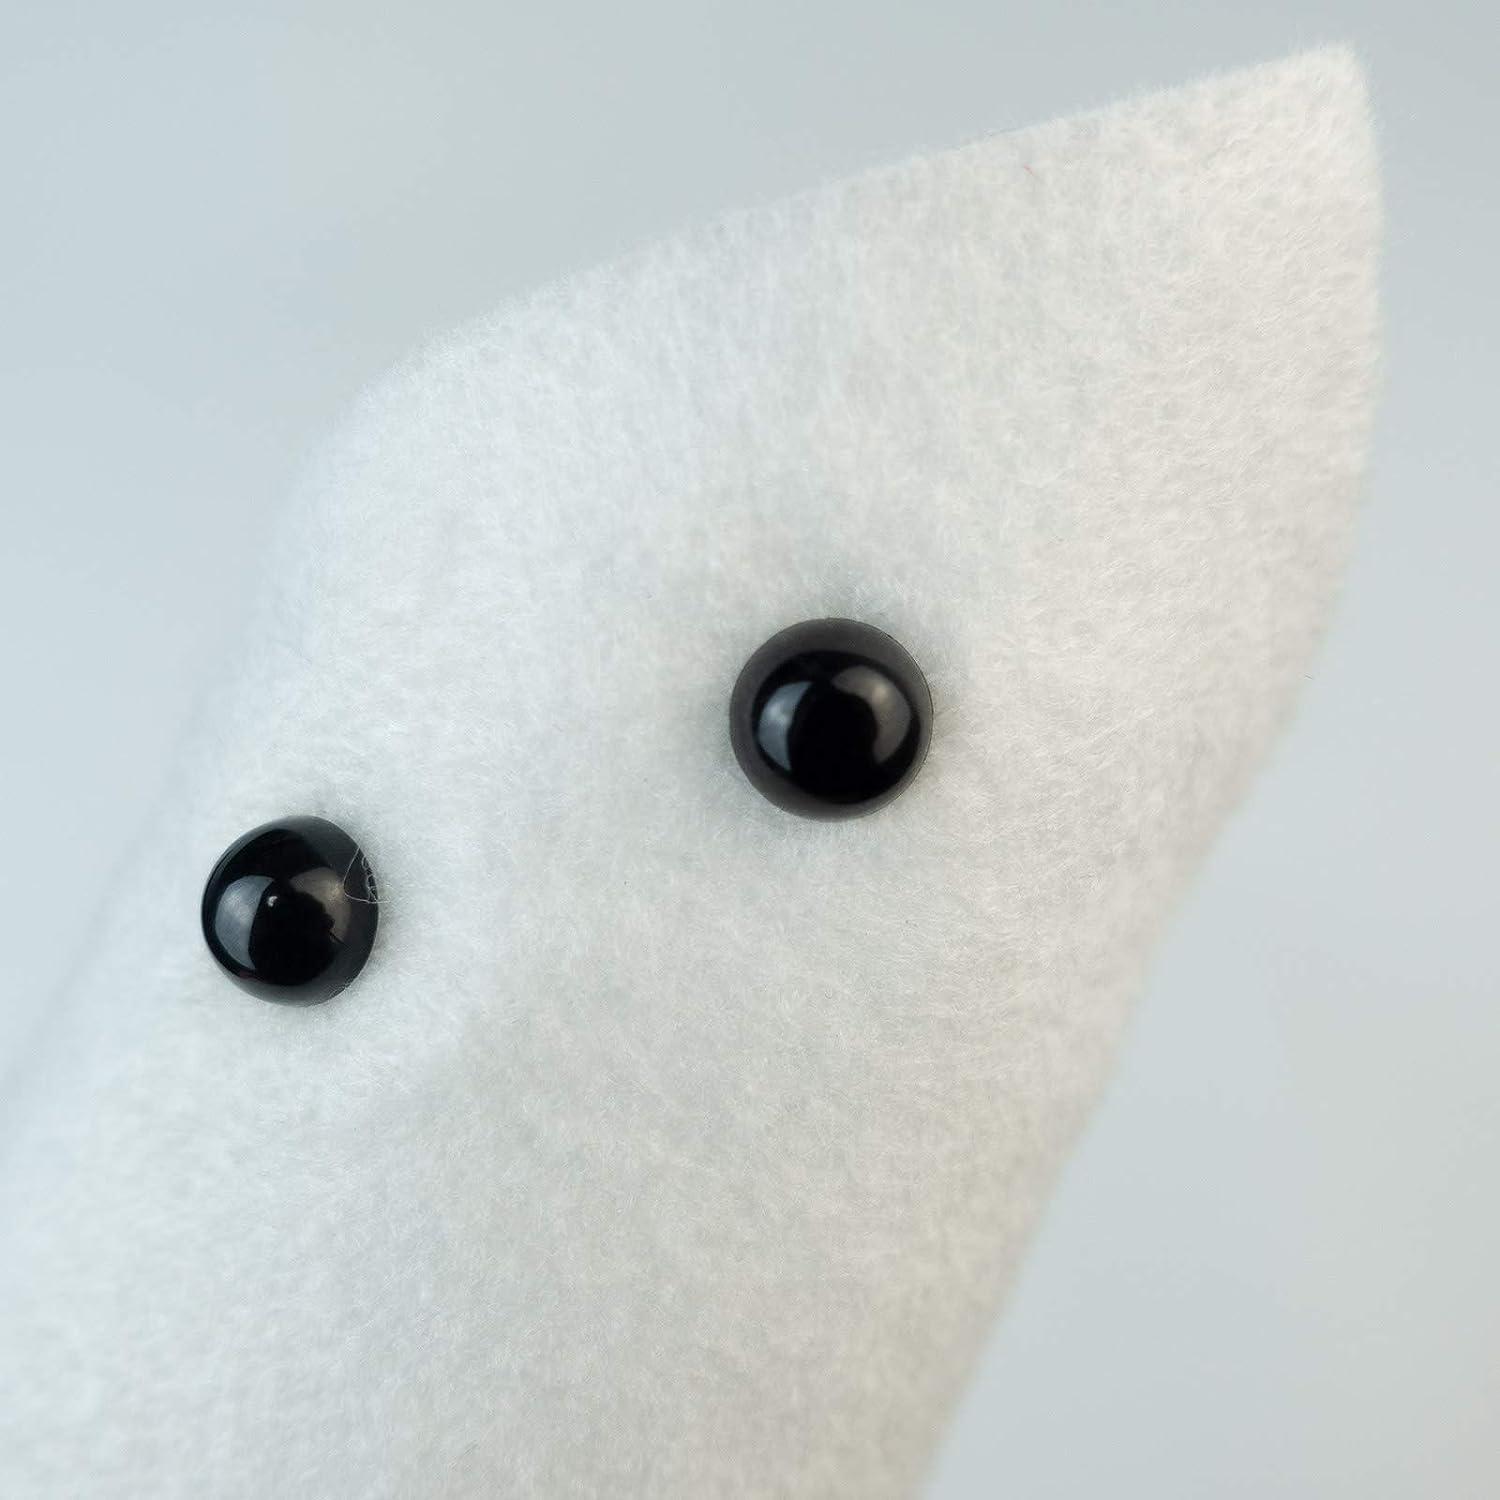 800PCS Safety Eyes and Noses for Amigurumi, 2 Boxes Crochet Eyes